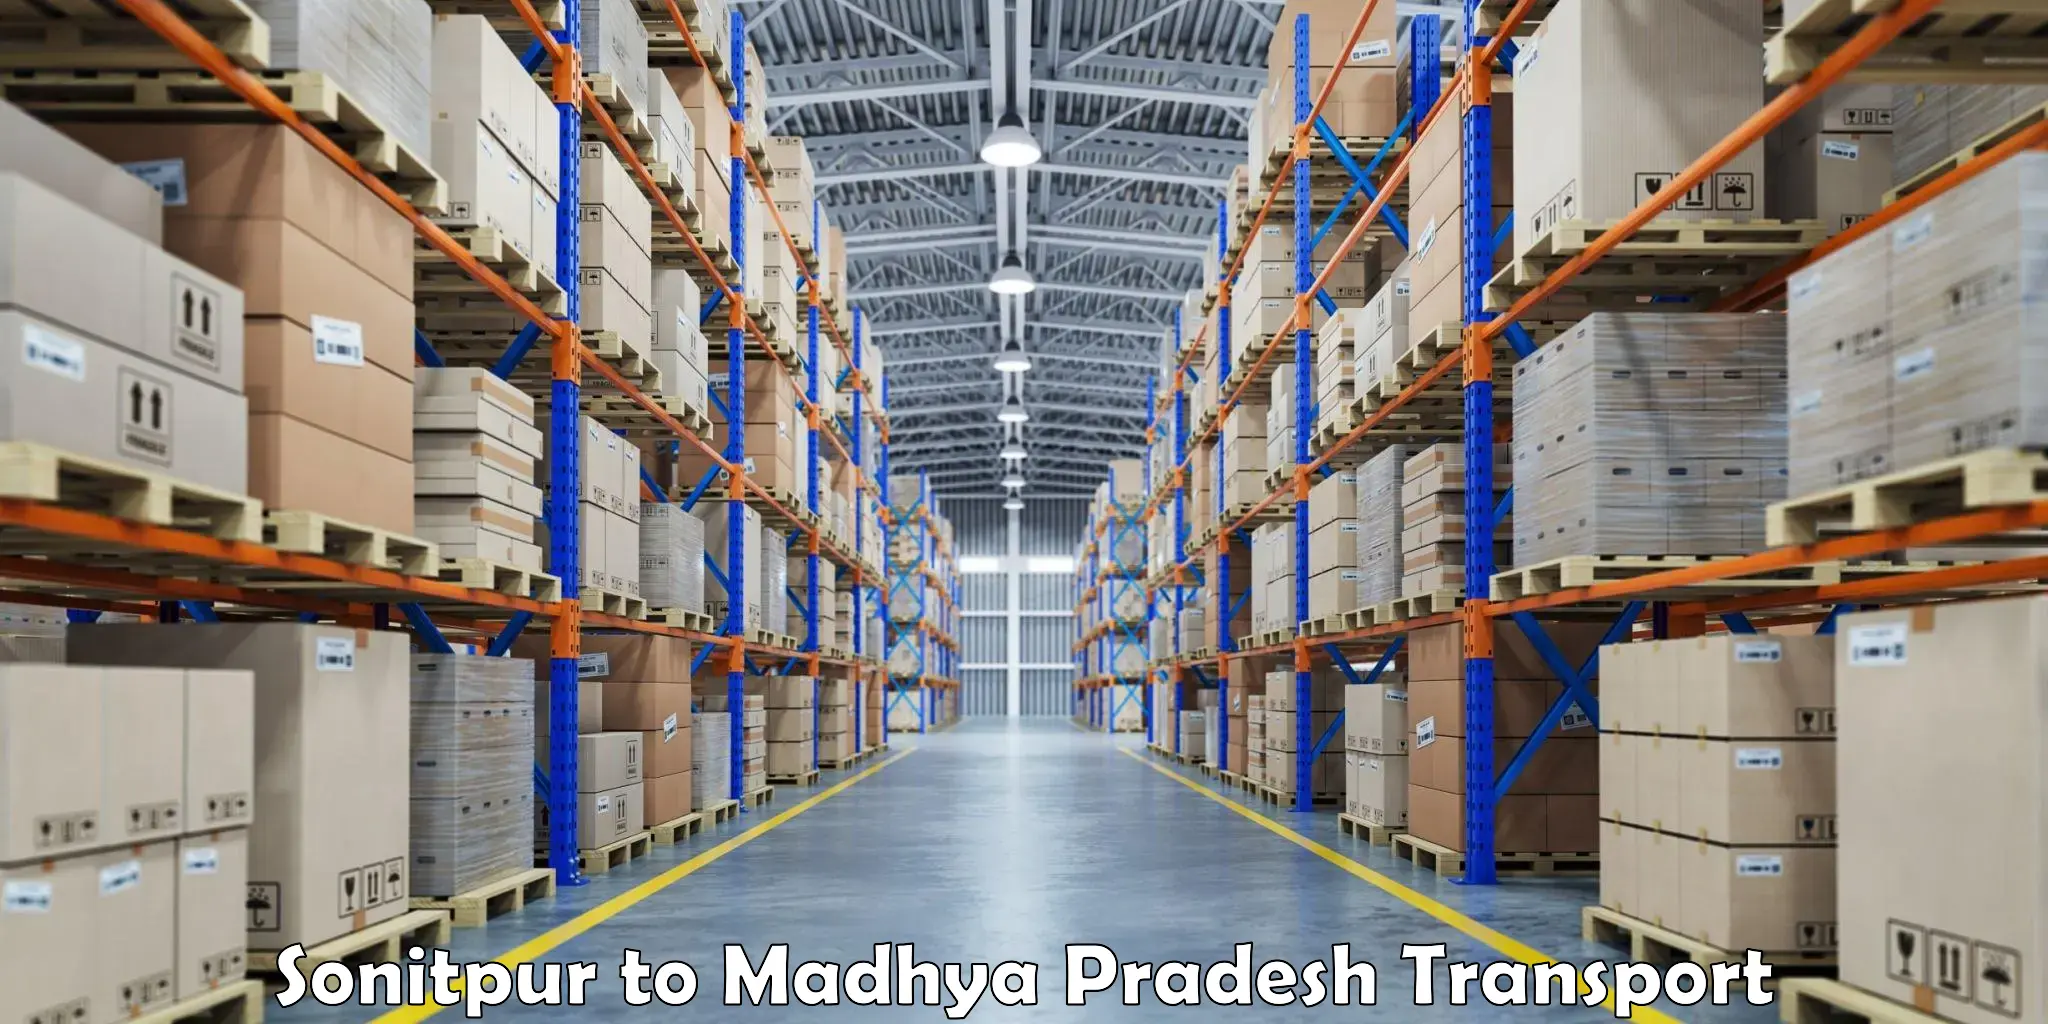 Truck transport companies in India in Sonitpur to Sendhwa